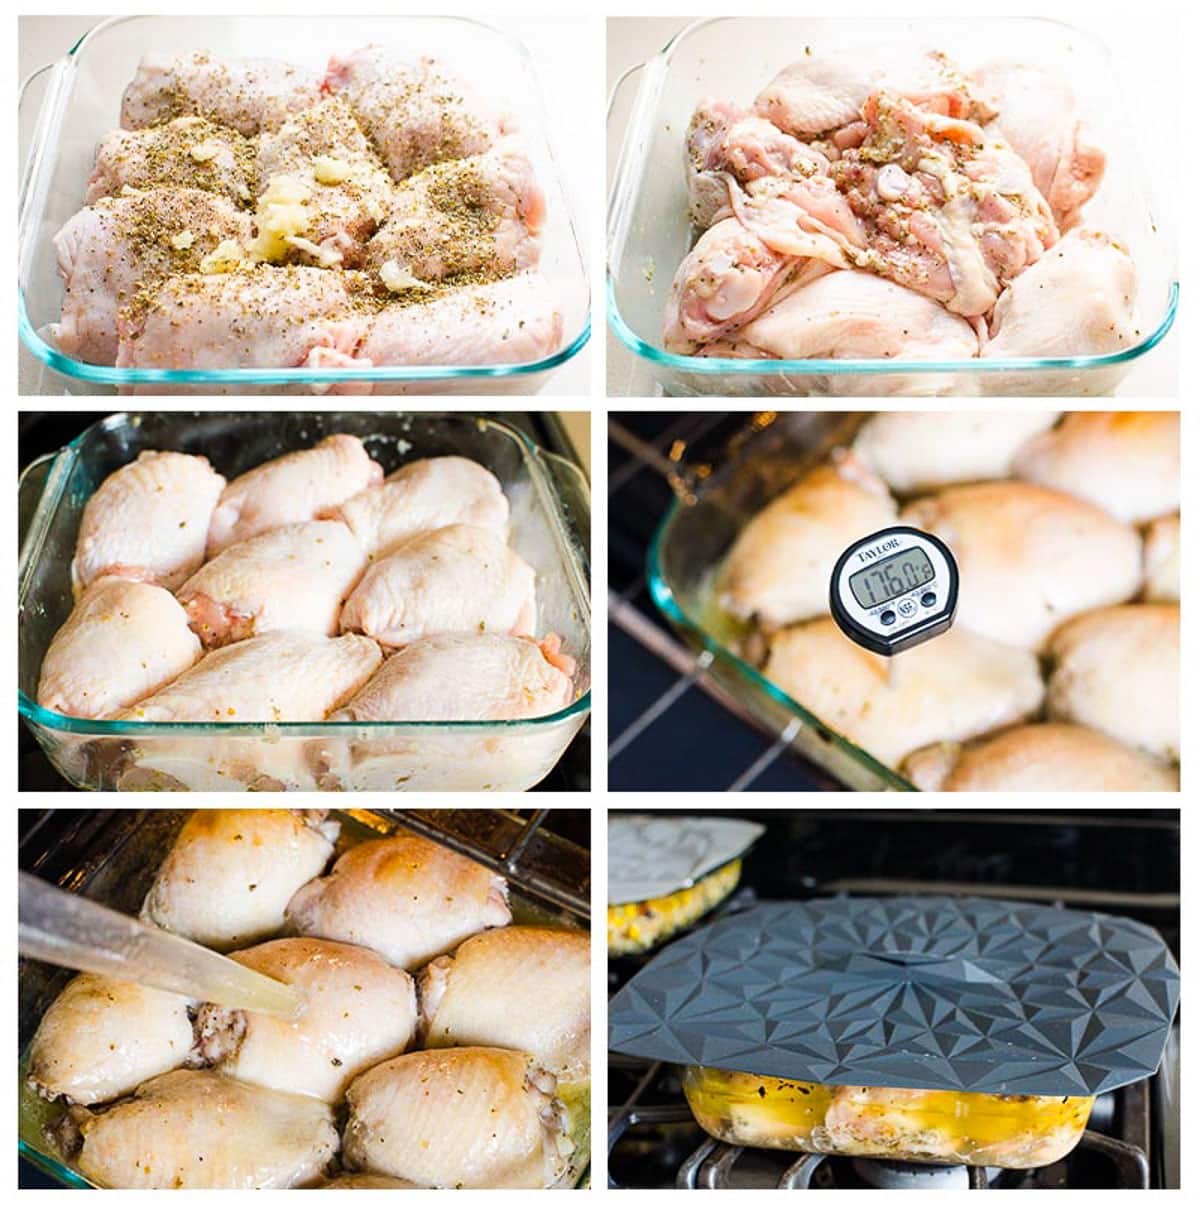 Step by step process how to bake chicken thighs in the oven.